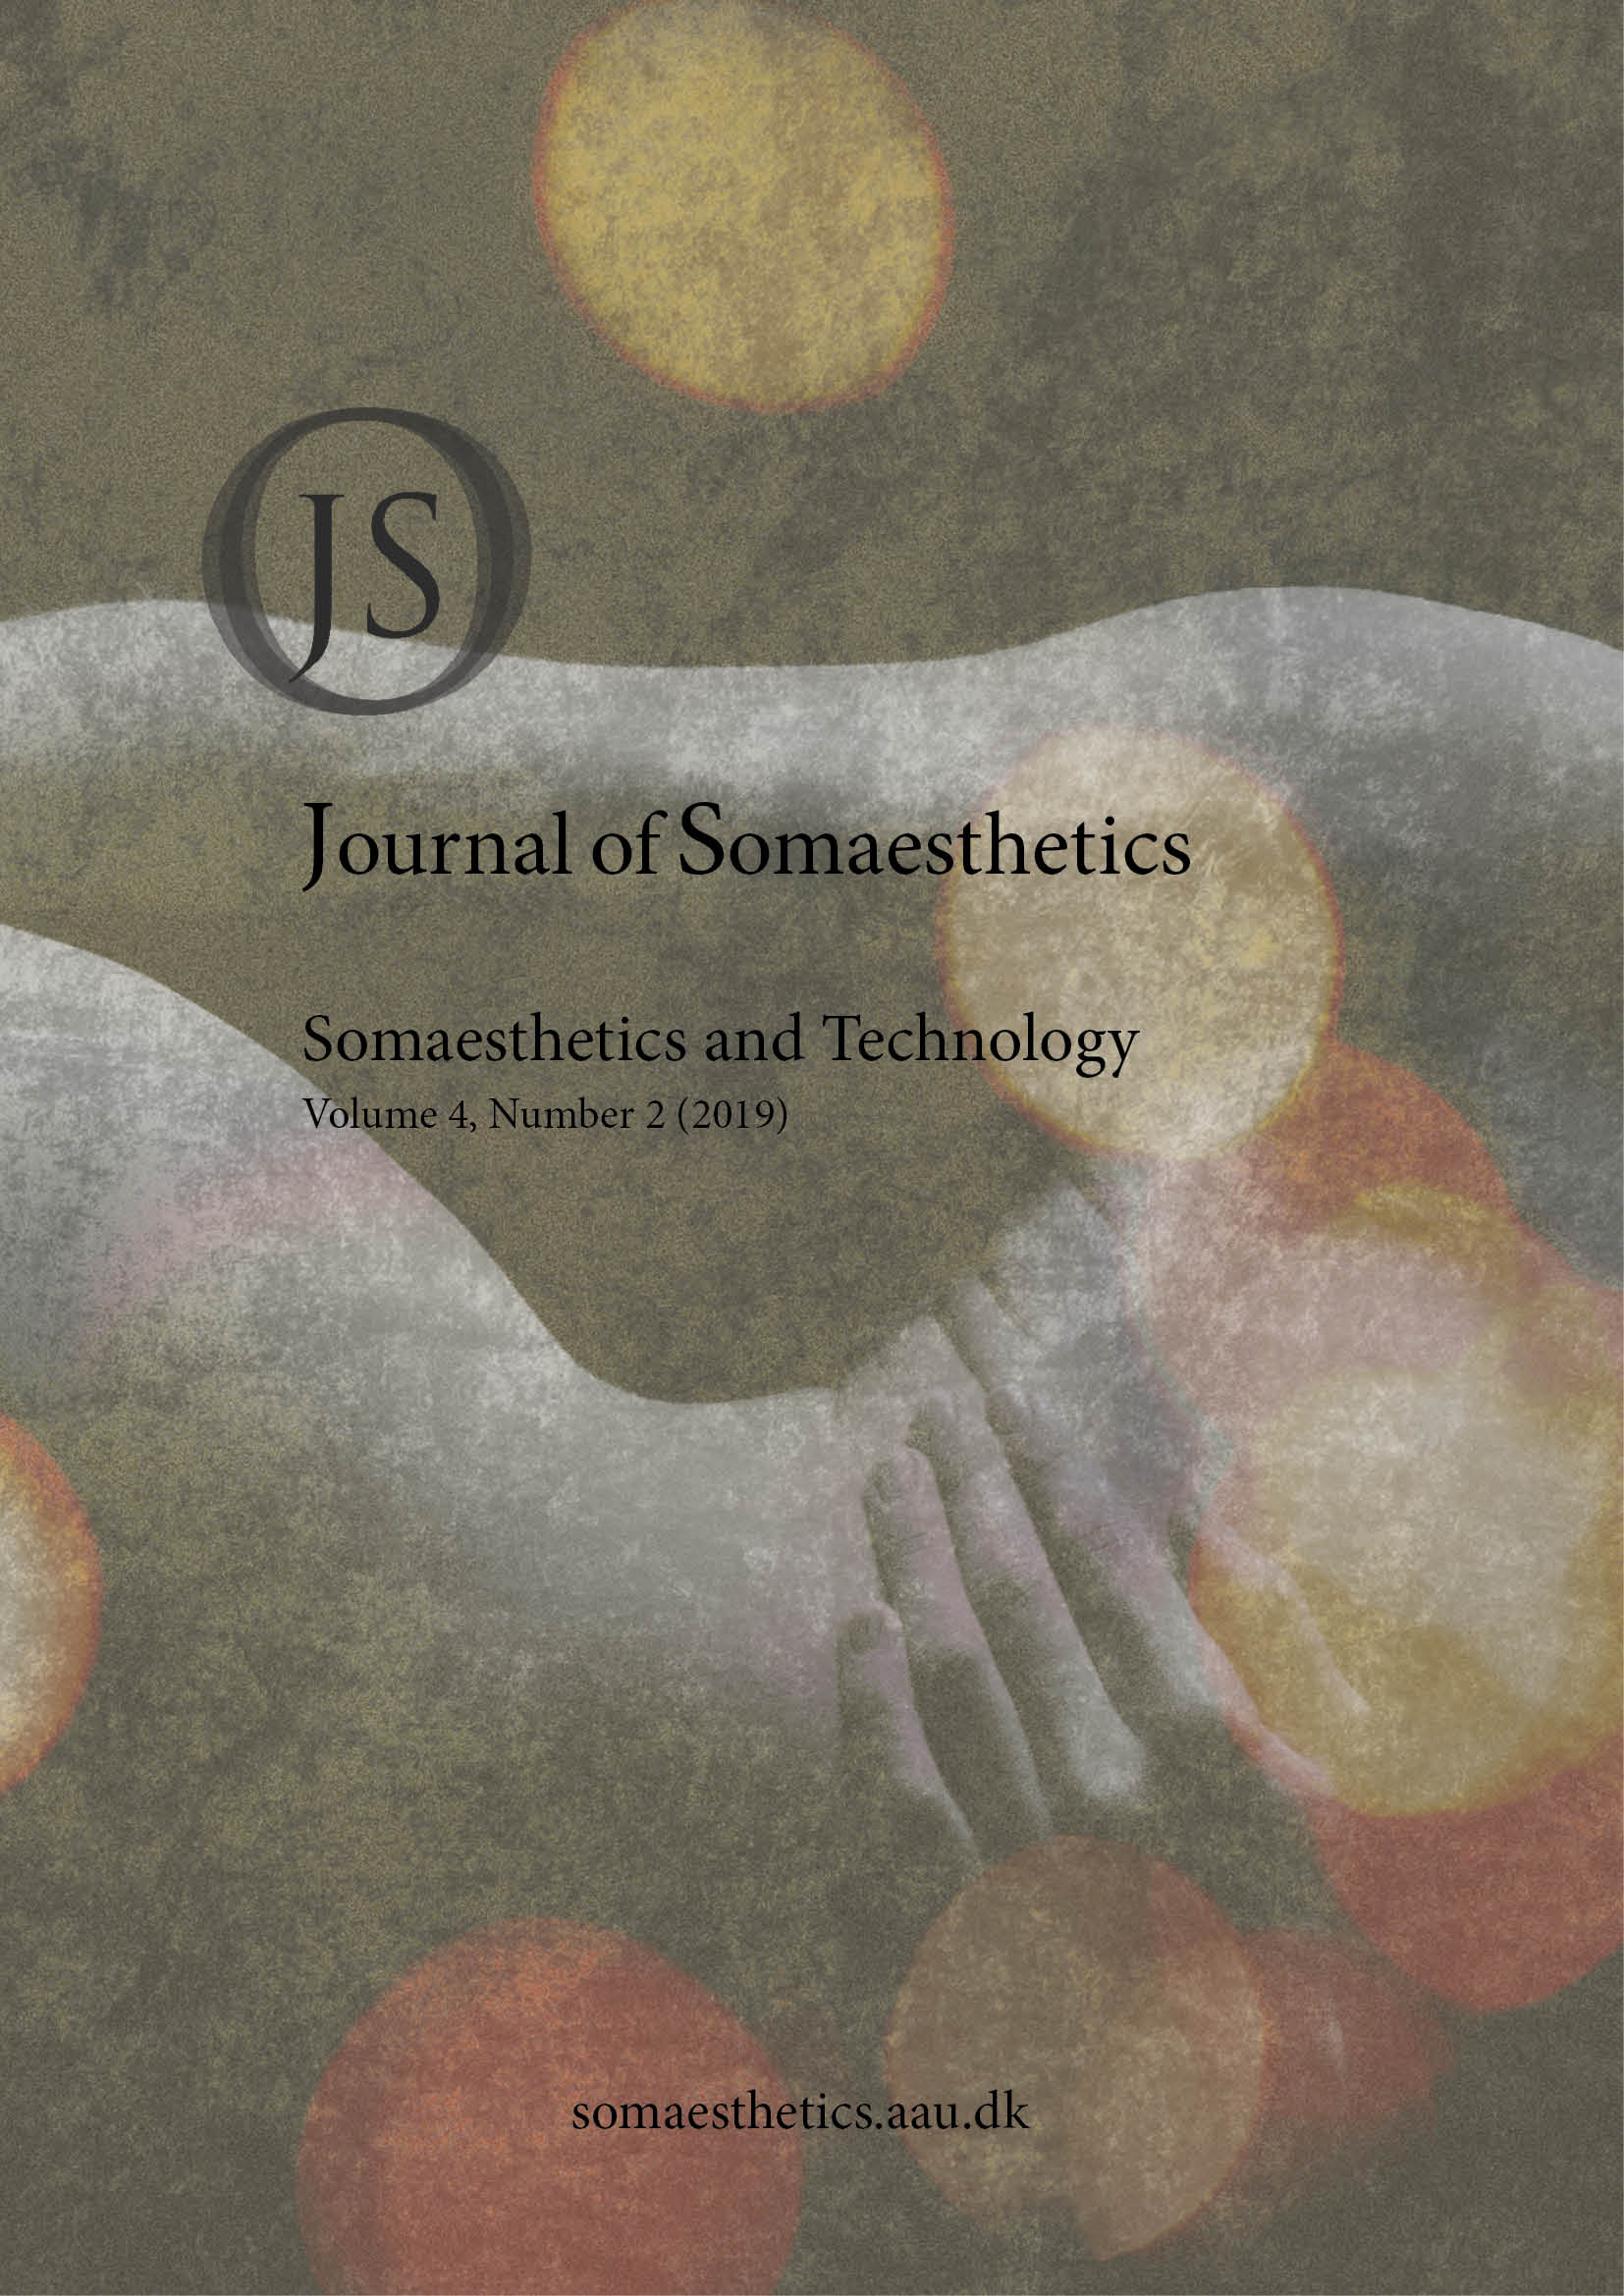 					View Vol. 4 No. 2 (2019): Somaesthetics and Technology
				